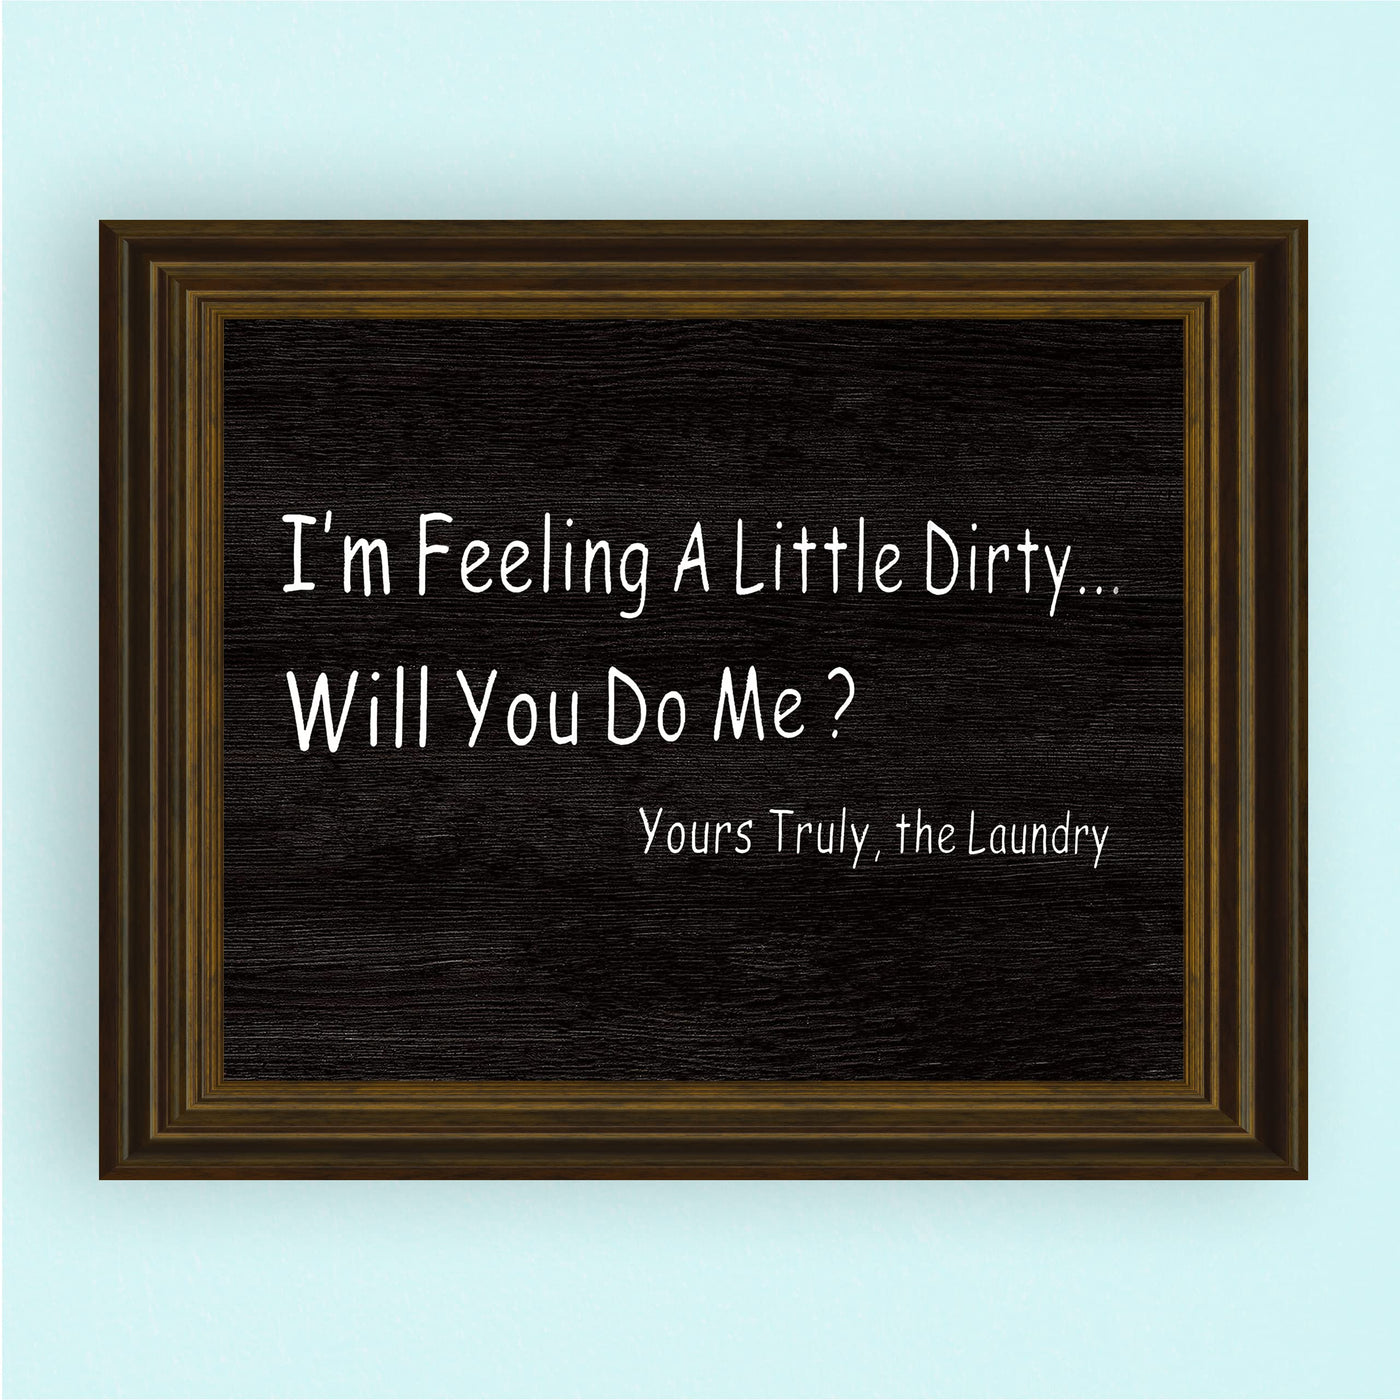 Feeling Dirty-Will You Do Me? -The Laundry-Funny Wall Art Decor -10 x 8" Vintage Replica Wood Design Photo Print-Ready to Frame. Home-Guest House-Accessories. Fun Sign to Inspire Home Duties!